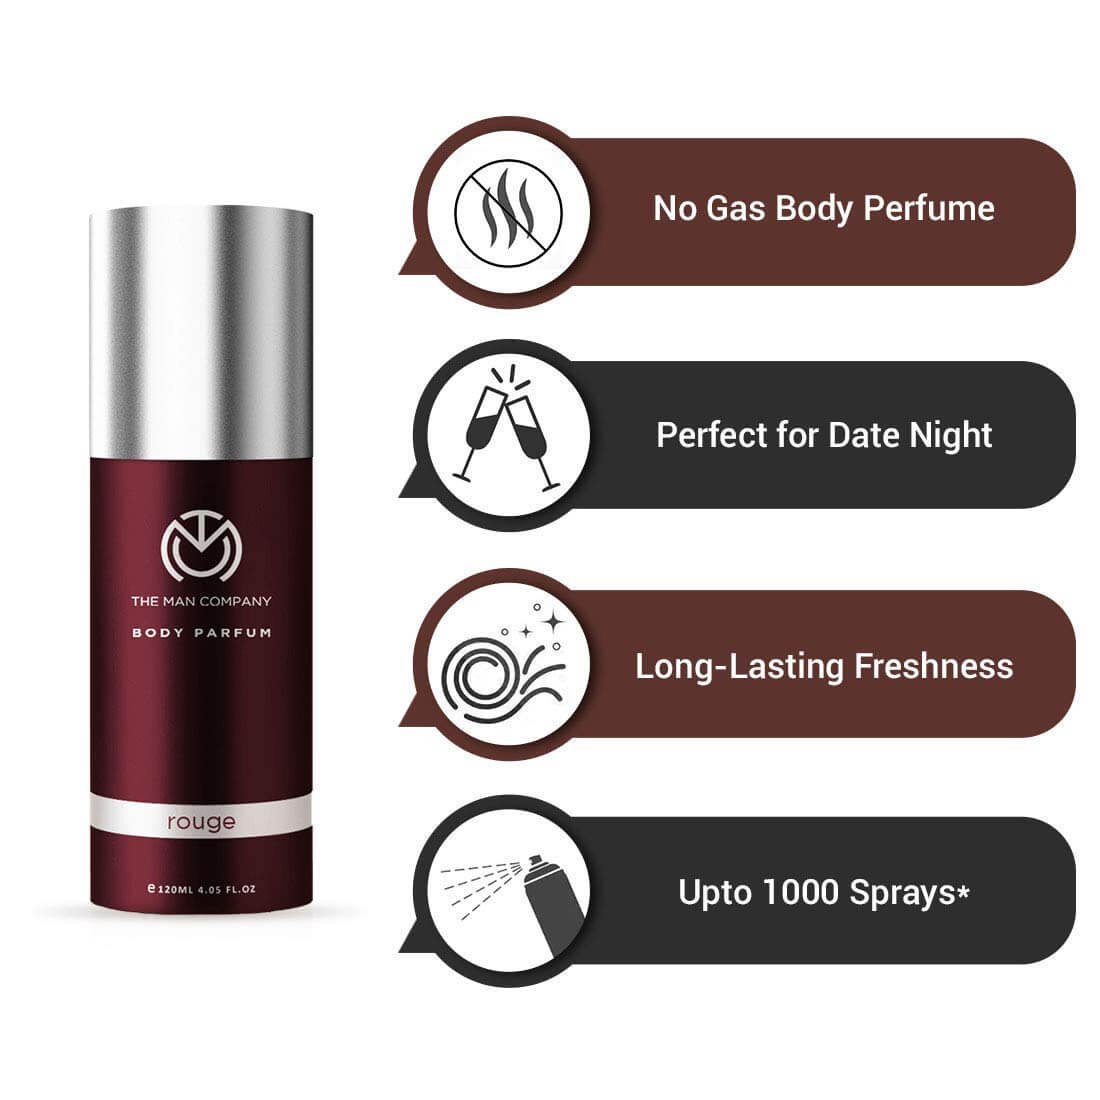 https://shoppingyatra.com/product_images/The Man Company Body Perfume For Men - Rouge  No Gas Deodorant  Body Spray For Men  Long Lasting Fragrance -120ml2.jpg